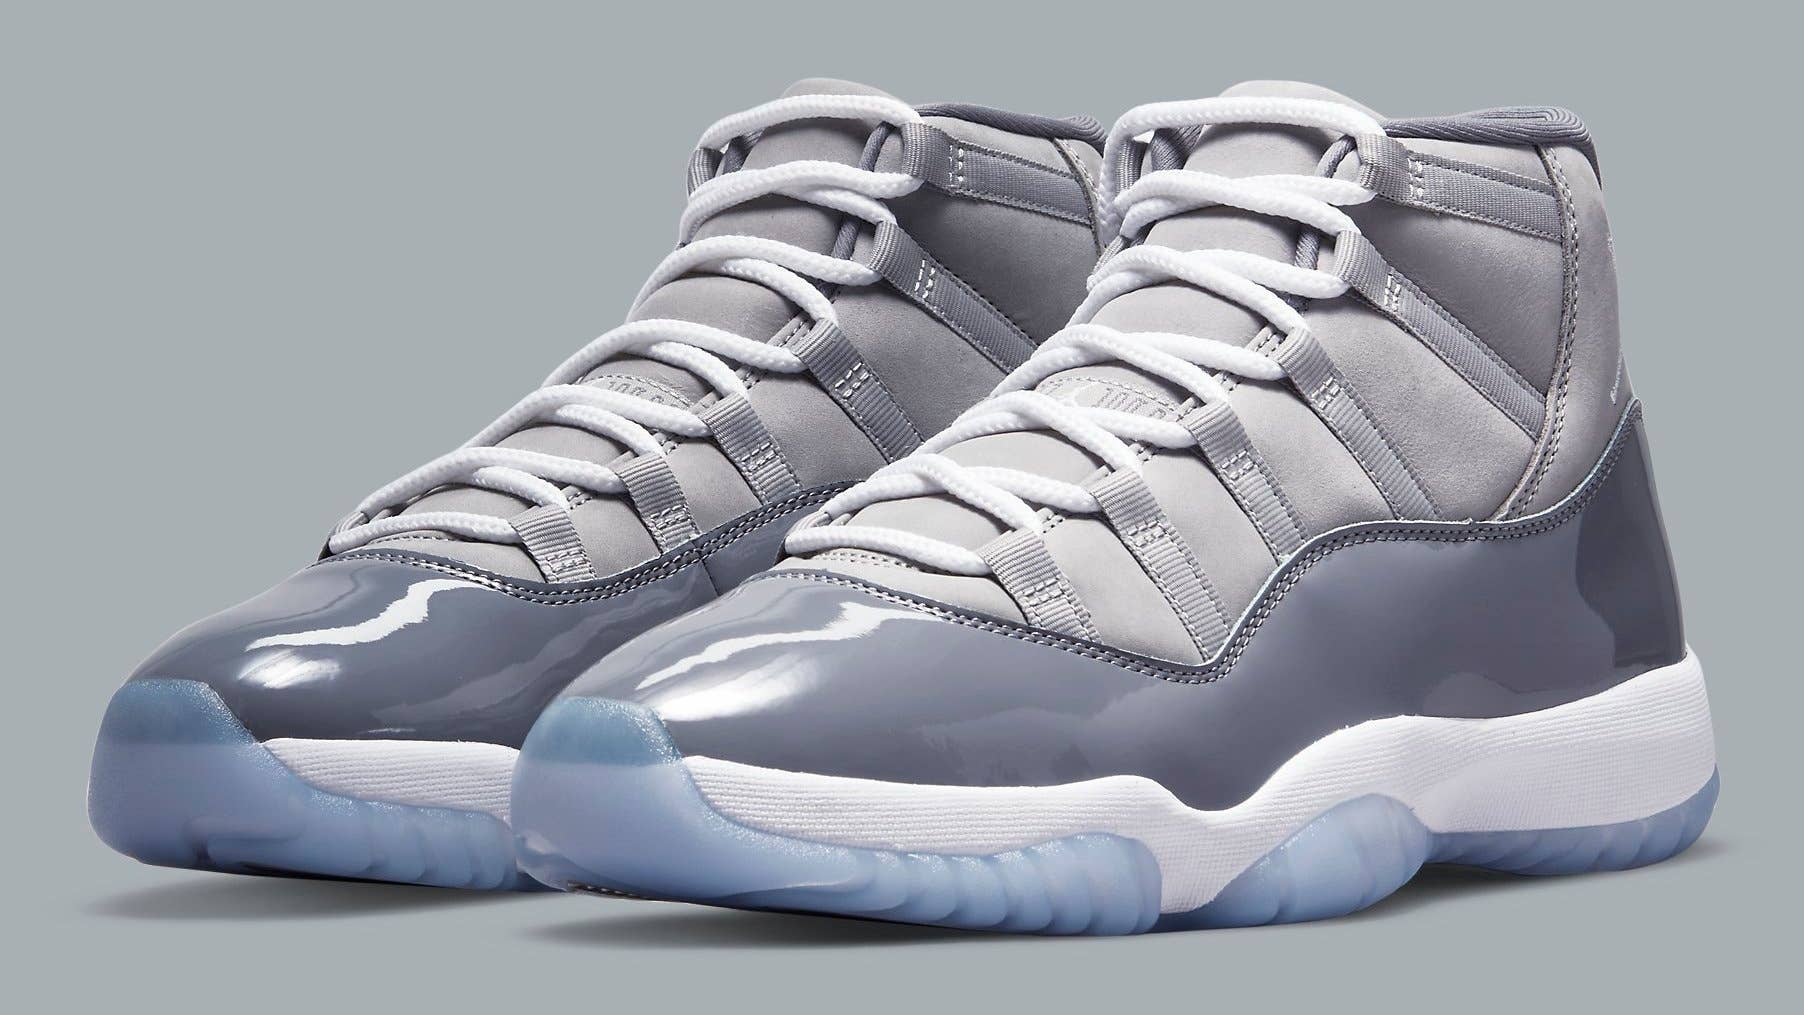 Official Look at This Year's 'Cool Grey' Air Jordan 11s Complex